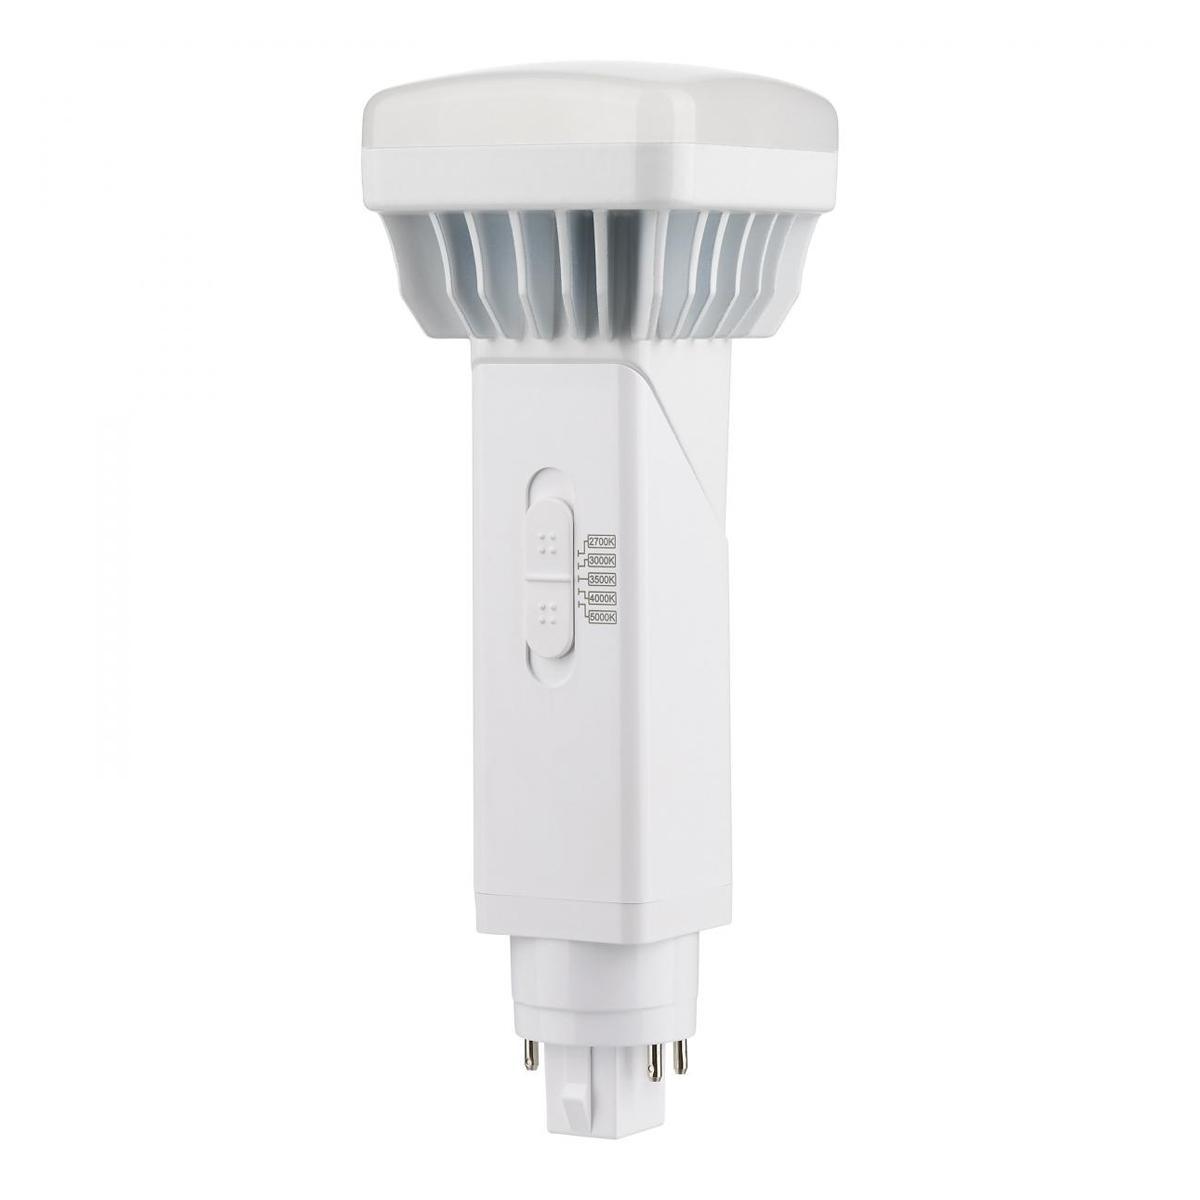 4 Pin PL LED Bulb, 16 Watt 1800 Lumens, Selectable CCT 2700K to 5000K, Universal, Replaces 42W CFL, G24q Base, Direct Or Bypass